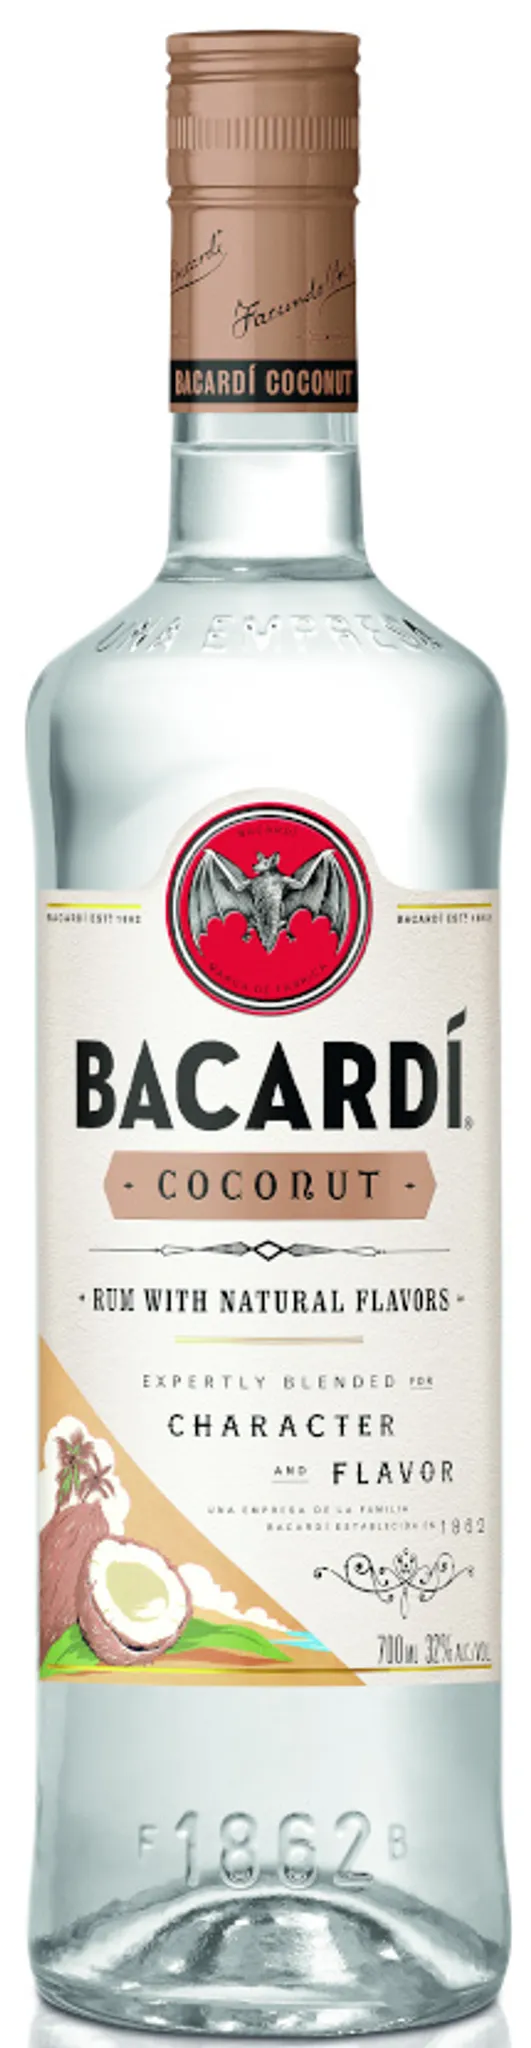 Bacardi Coconut Rum Flavors 32 Natural with 